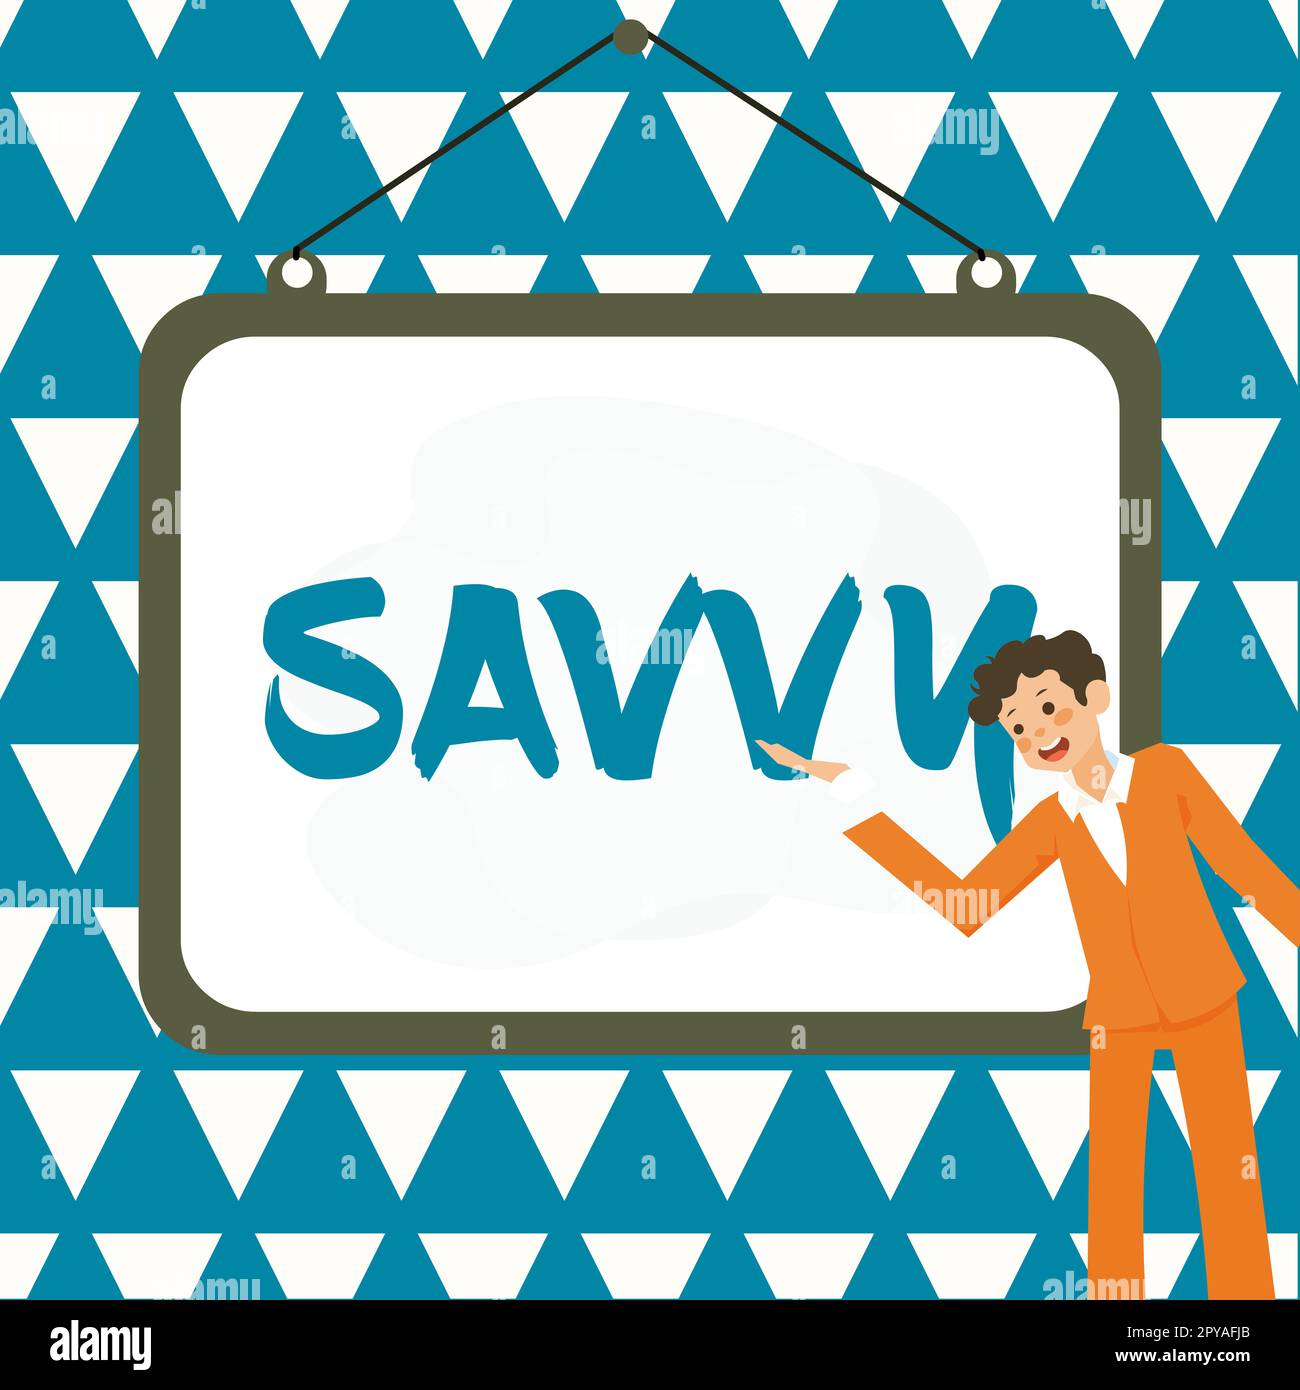 Text sign showing Savvy. Internet Concept having perception, comprehension in practical matters Stock Photo